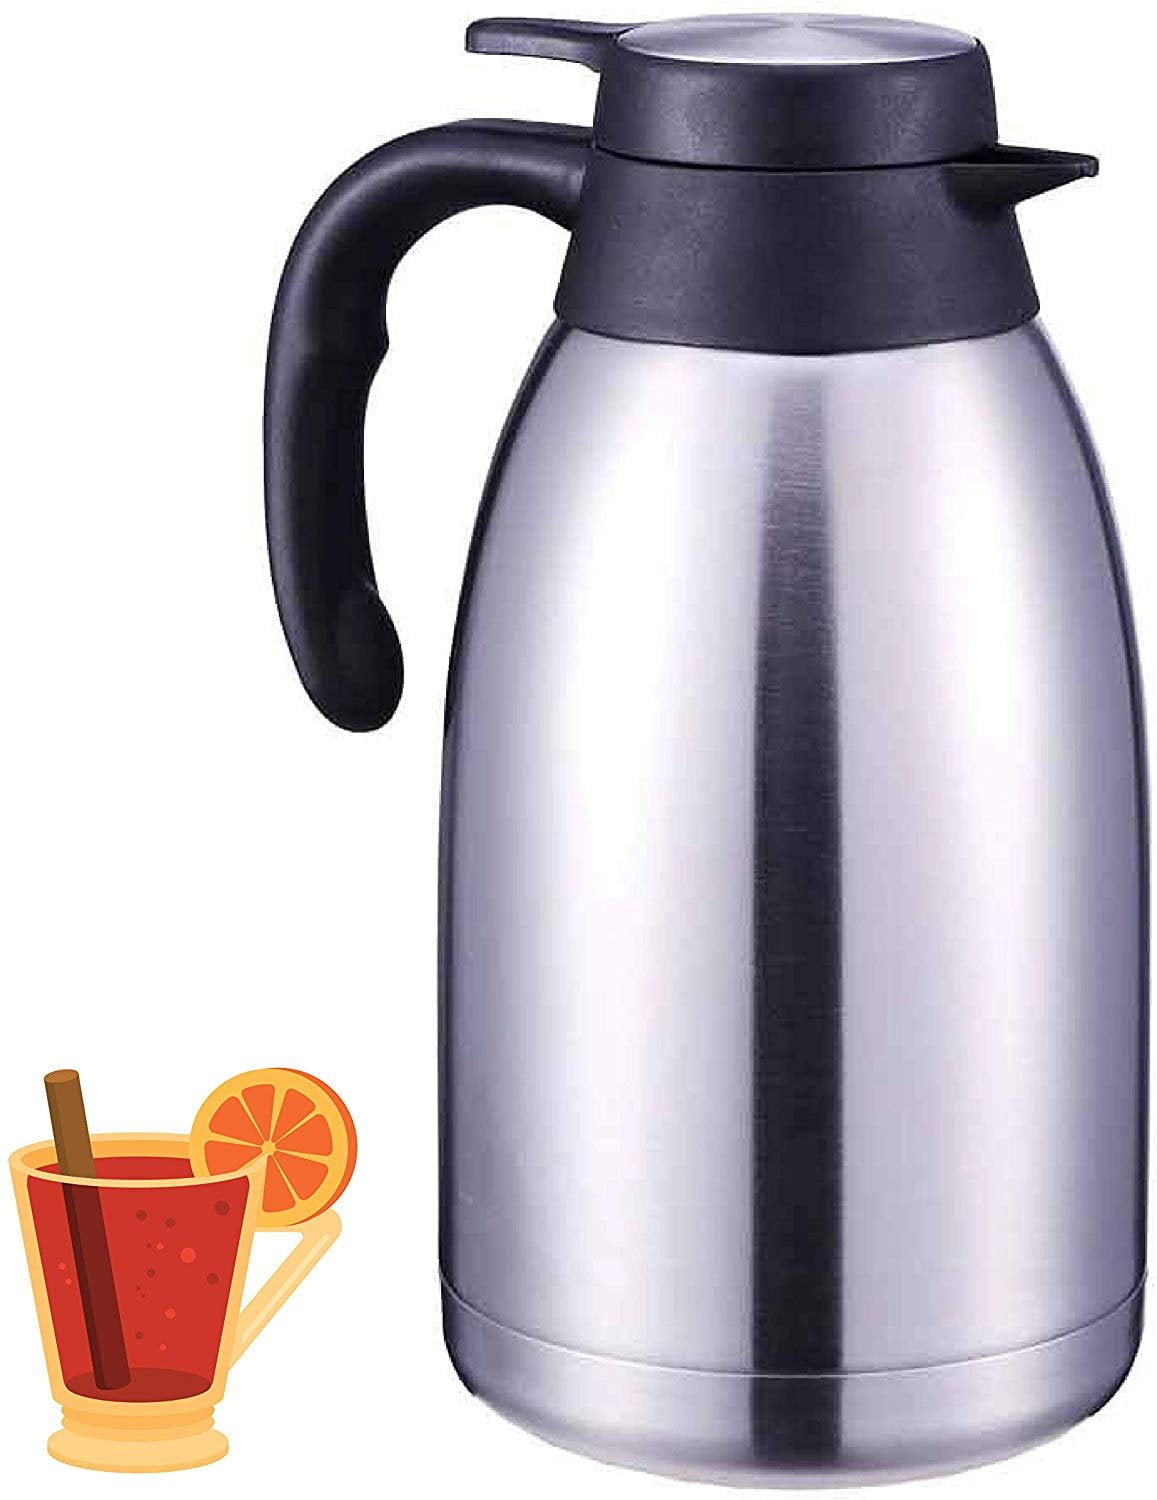 Water 12 Hour Heat Retention and Coffee Dispenser CozyKit Stainless Steel Thermal Coffee Carafe 1.5 Liter Tea Double Walled Vacuum Flask 